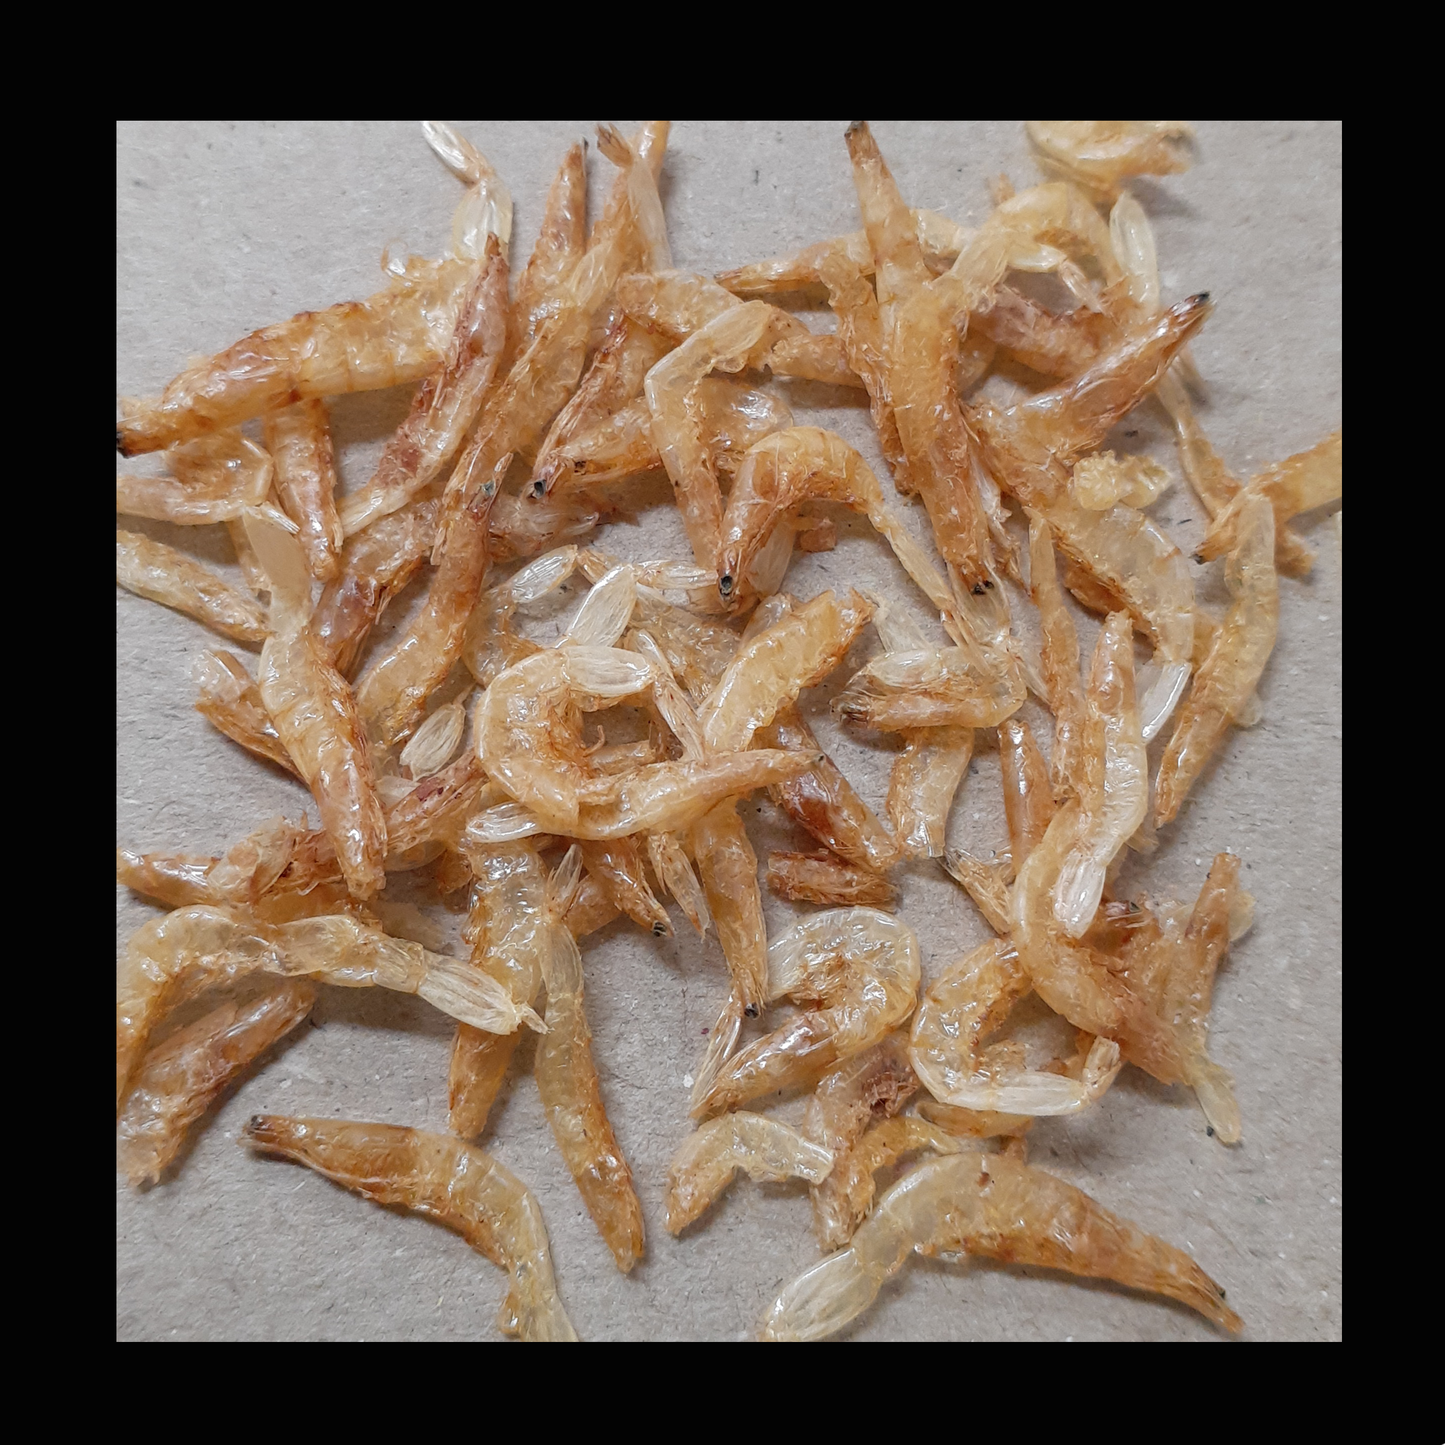 Whole Dried Shrimp 150g High Protein Fish Food